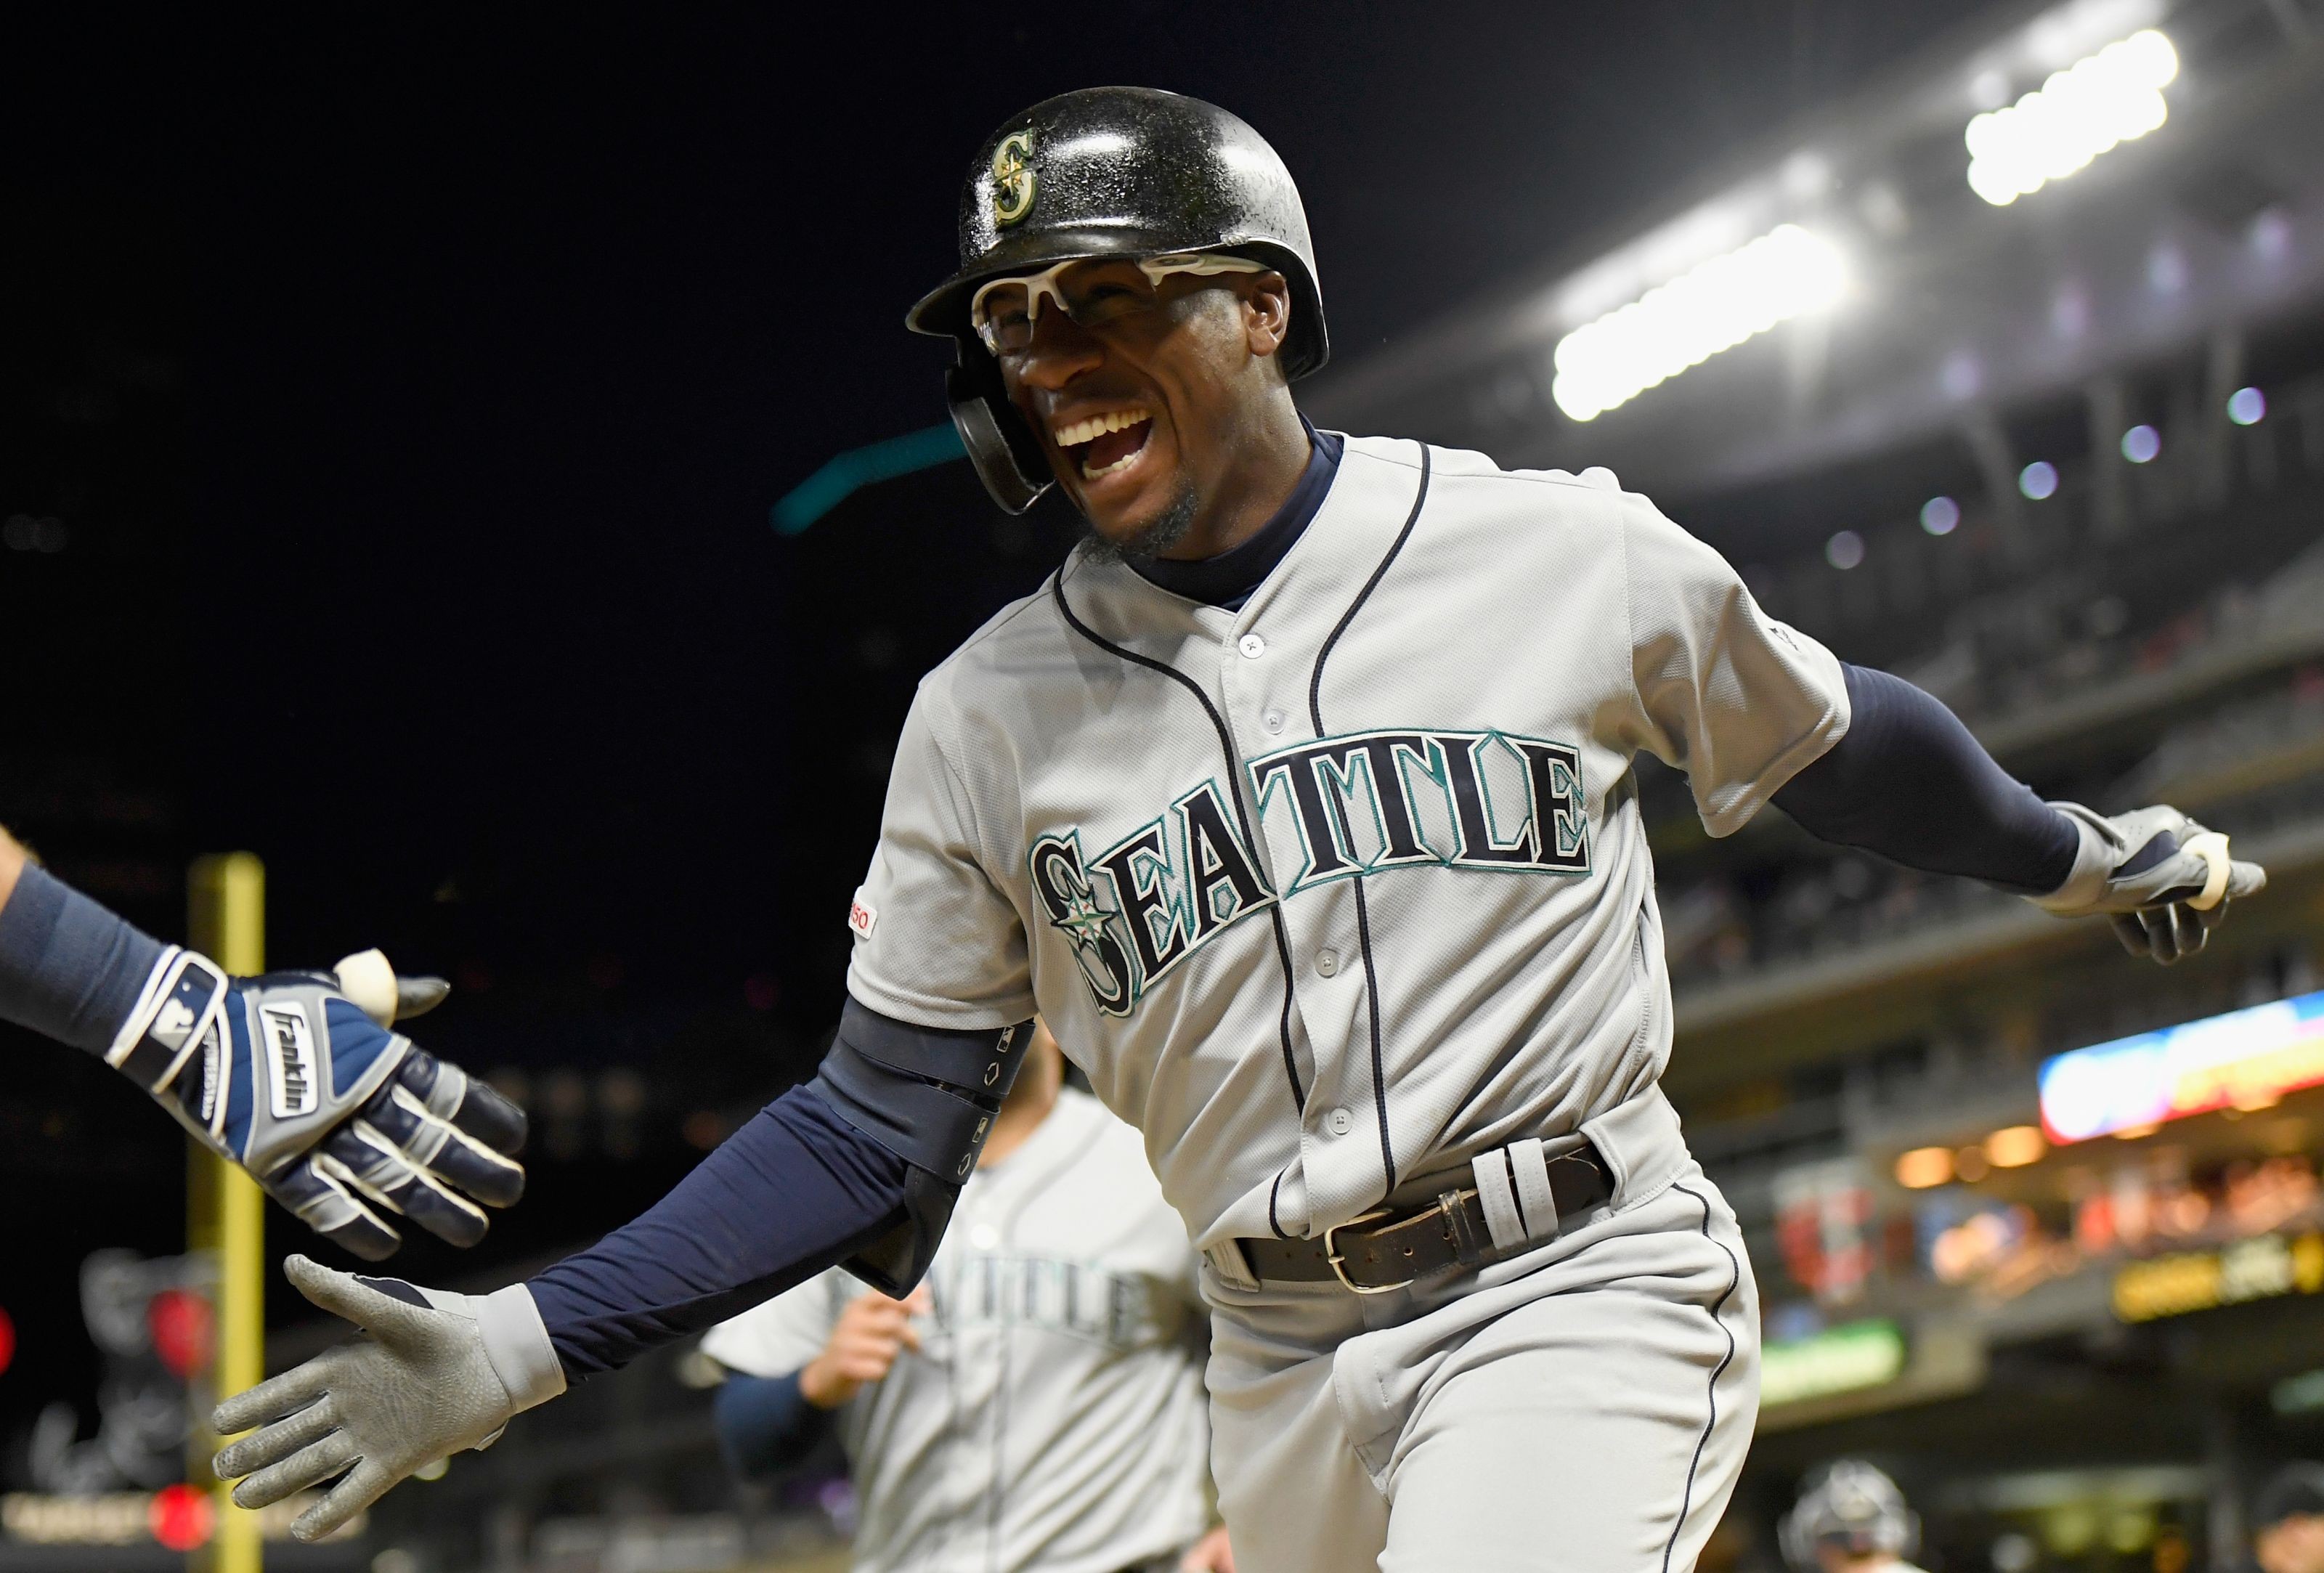 Mariners second baseman going forward in 2020